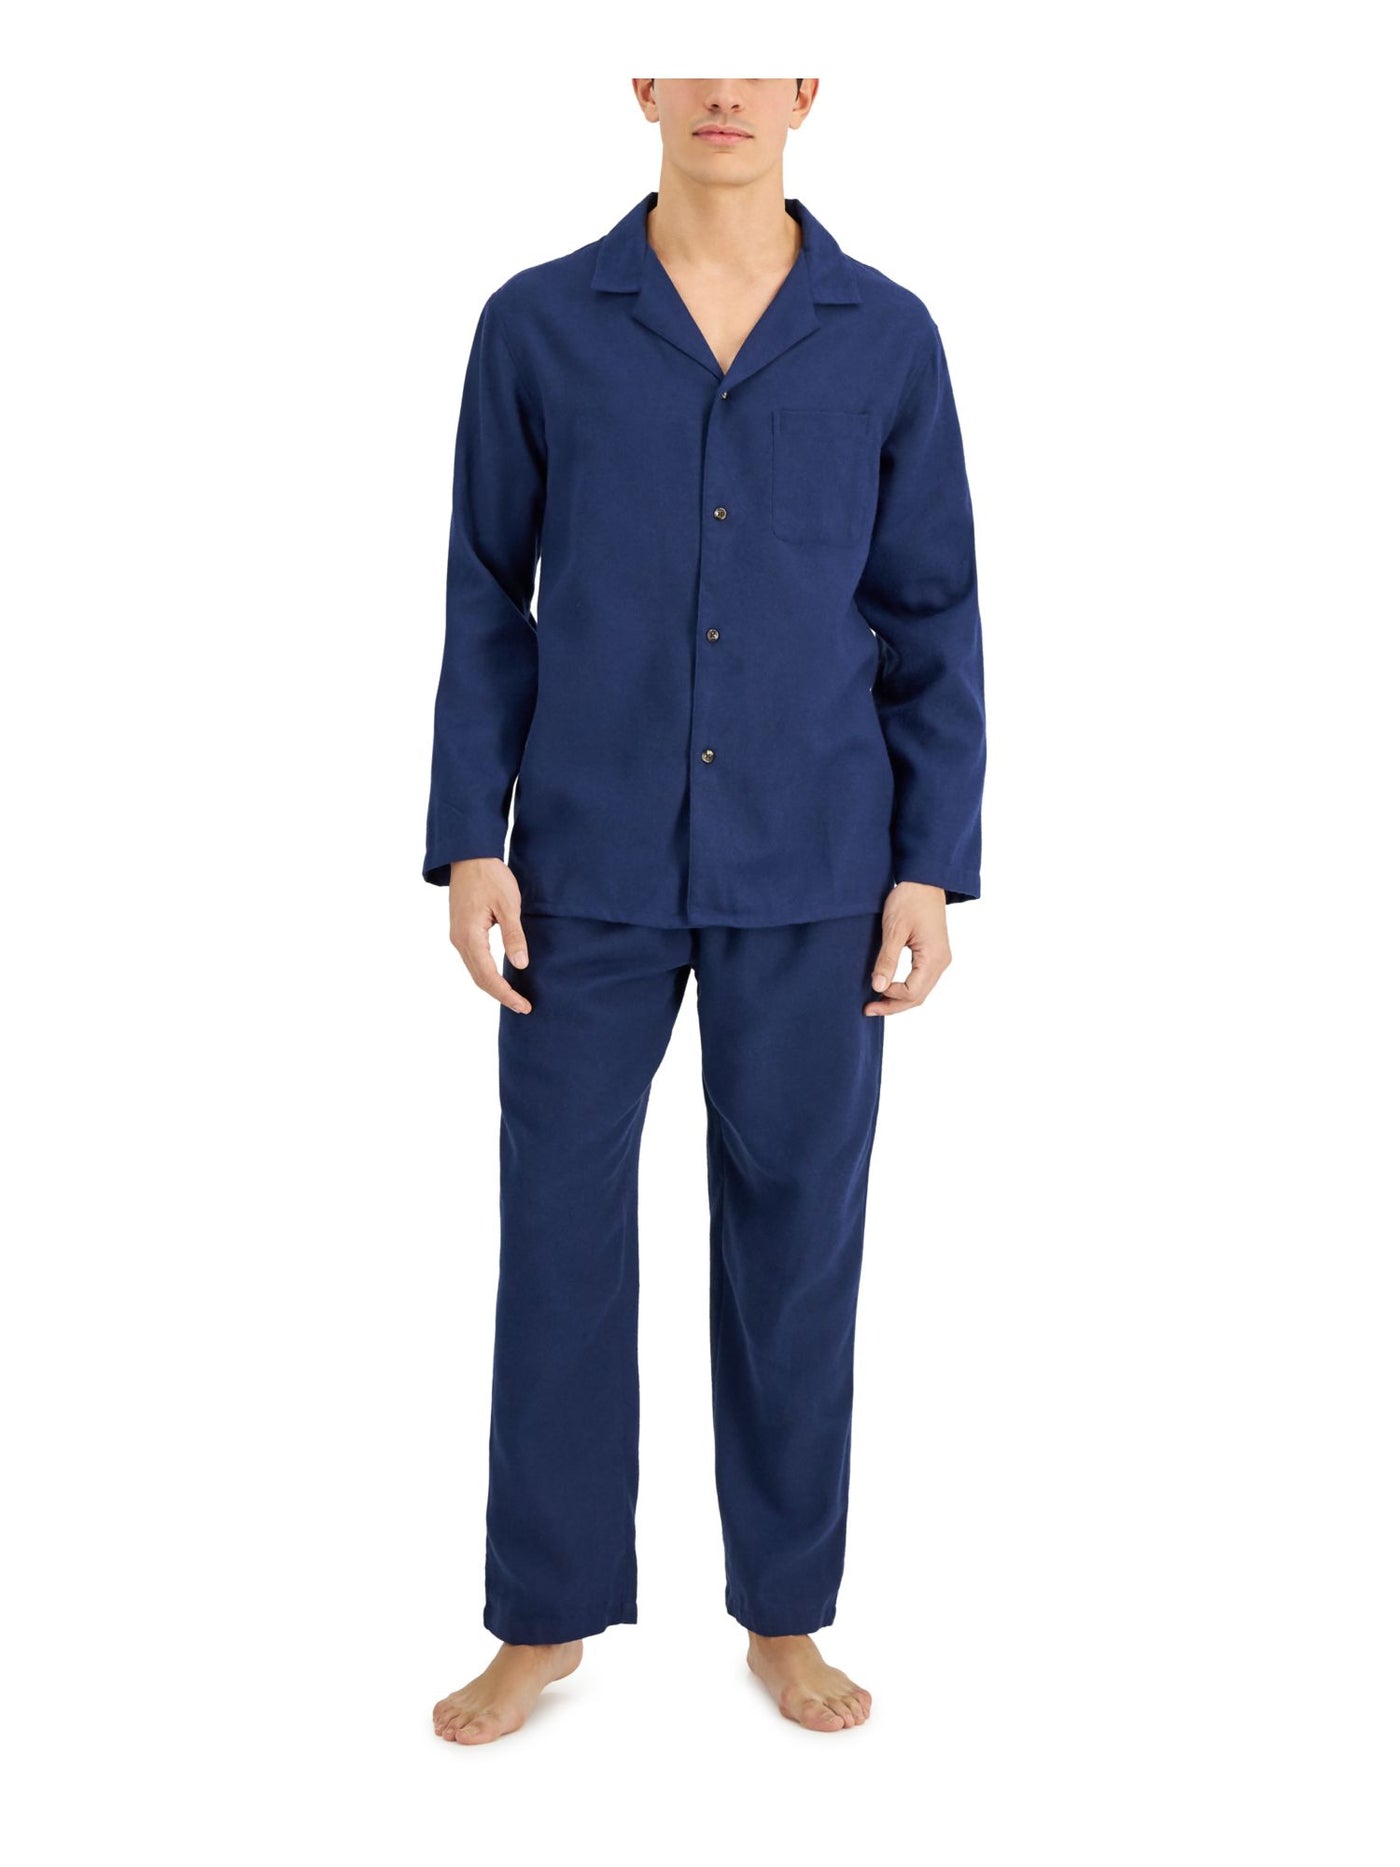 CLUBROOM Mens Navy Notched Collar Long Sleeve Button Up Top Straight leg Pants Pajamas XL